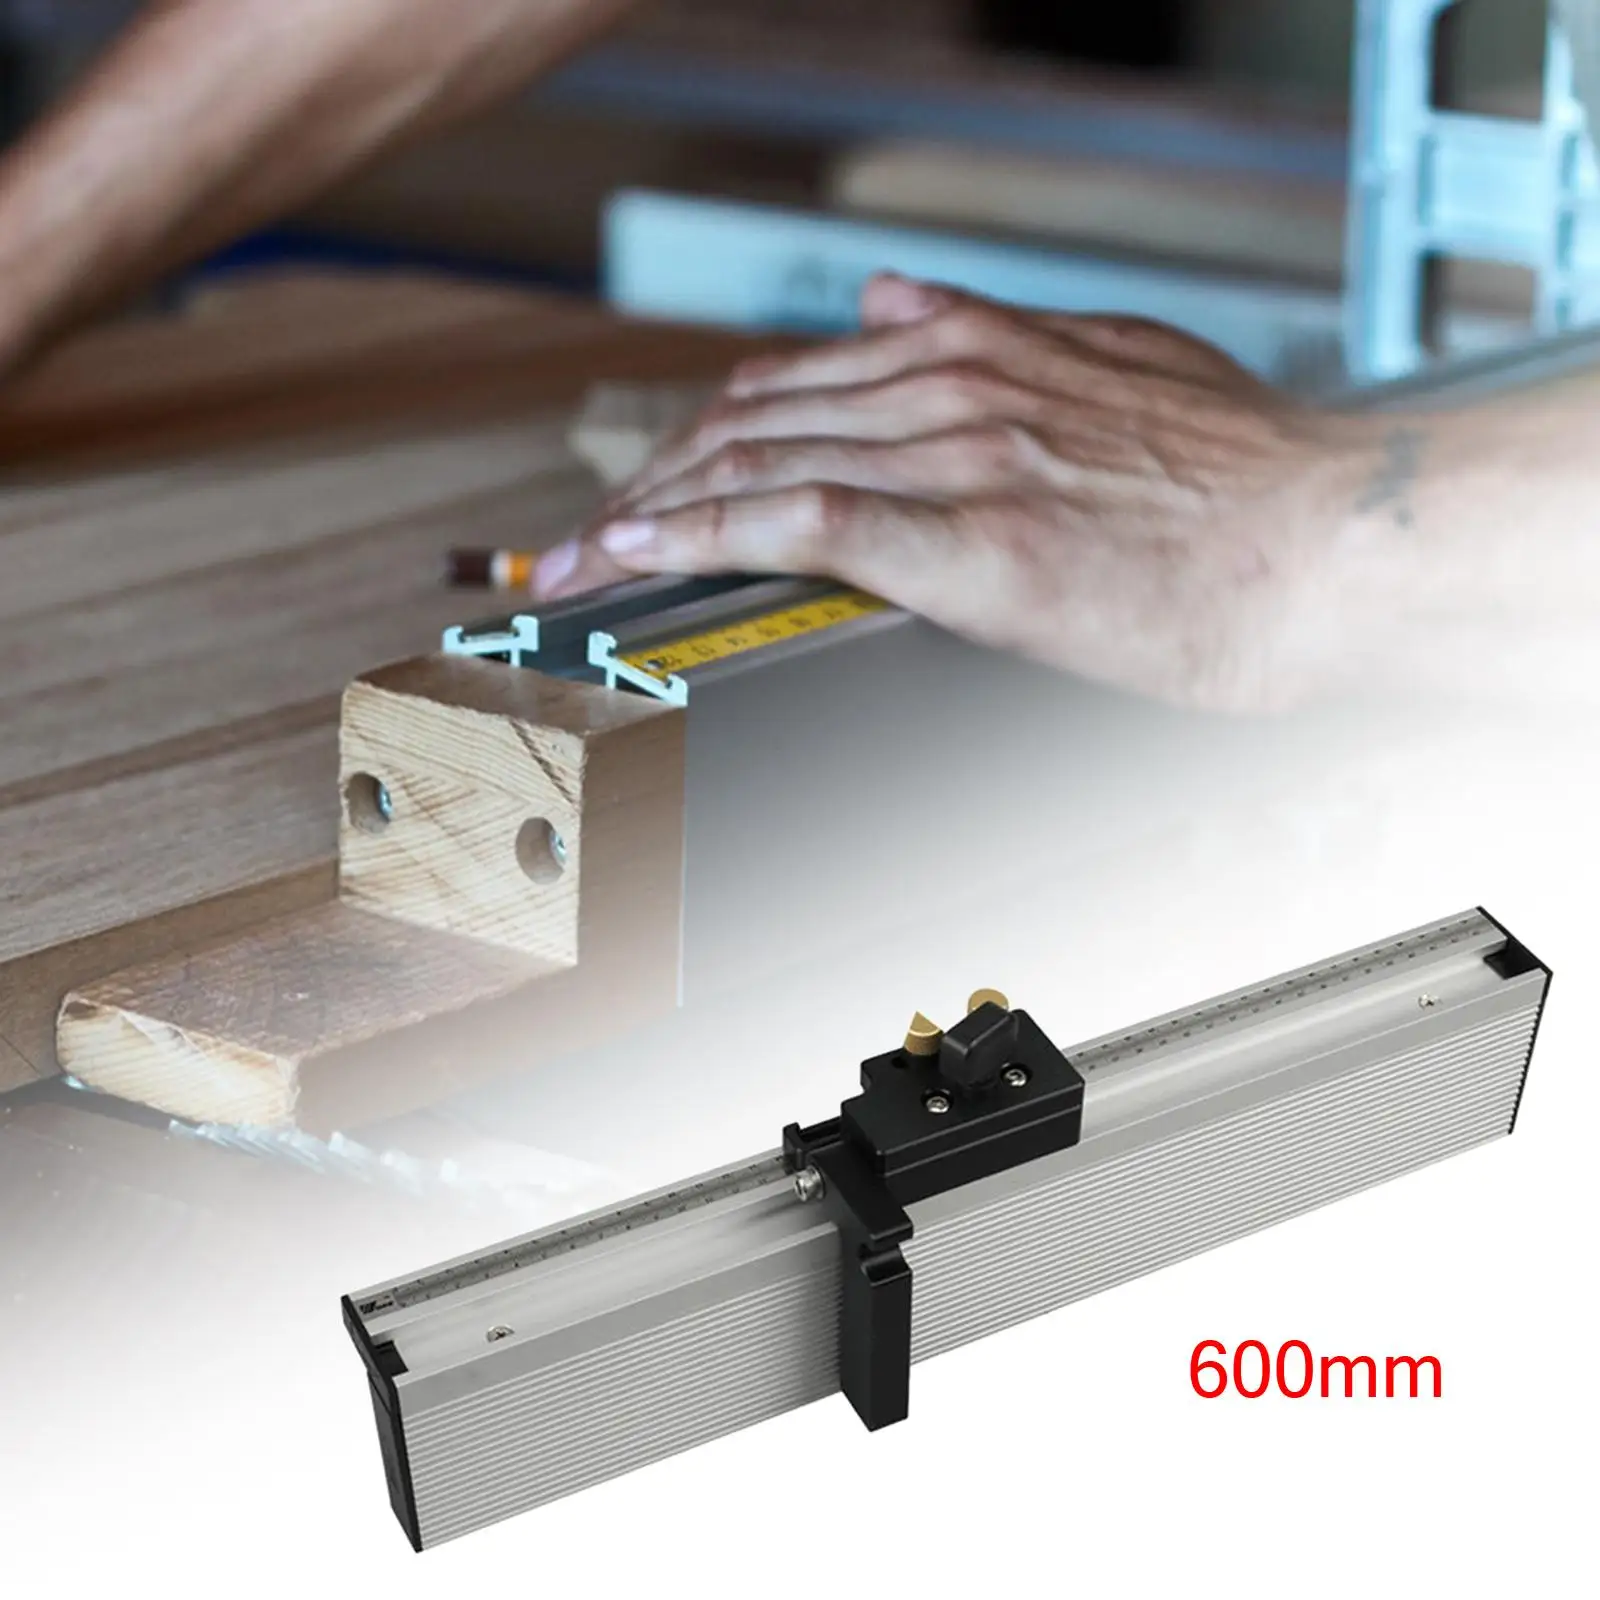 Aluminium Profile Fence Sliding Brackets Stop Table Accessories with Movable/Fixed  Miter Gauge Aluminum T Tracks Slot